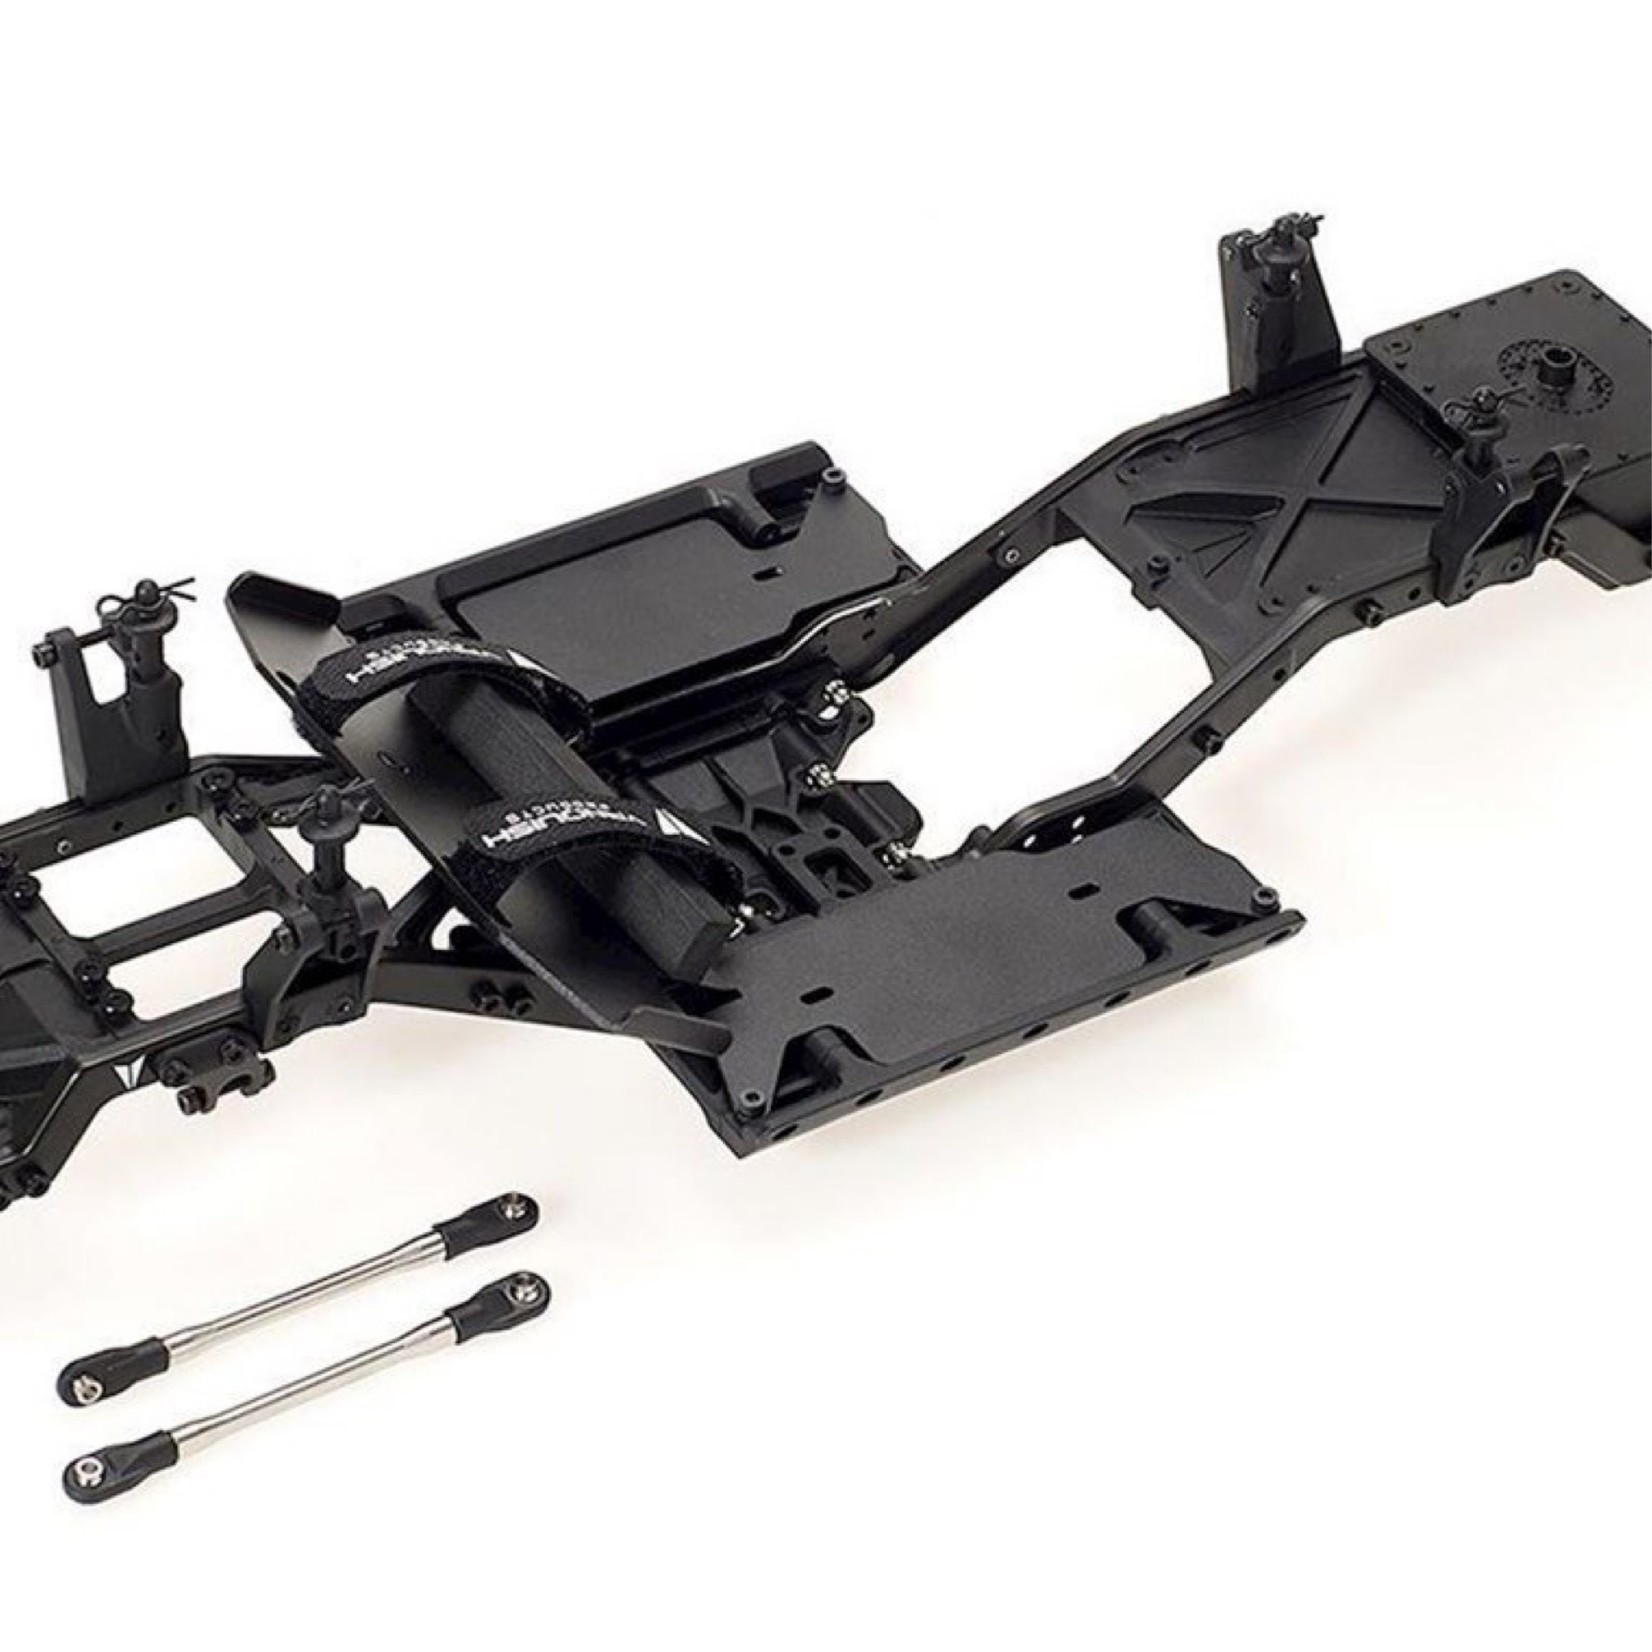 Vanquish Products Vanquish Products SCX10 II VS4-10 Rock Crawler Chassis Kit #VPS10130